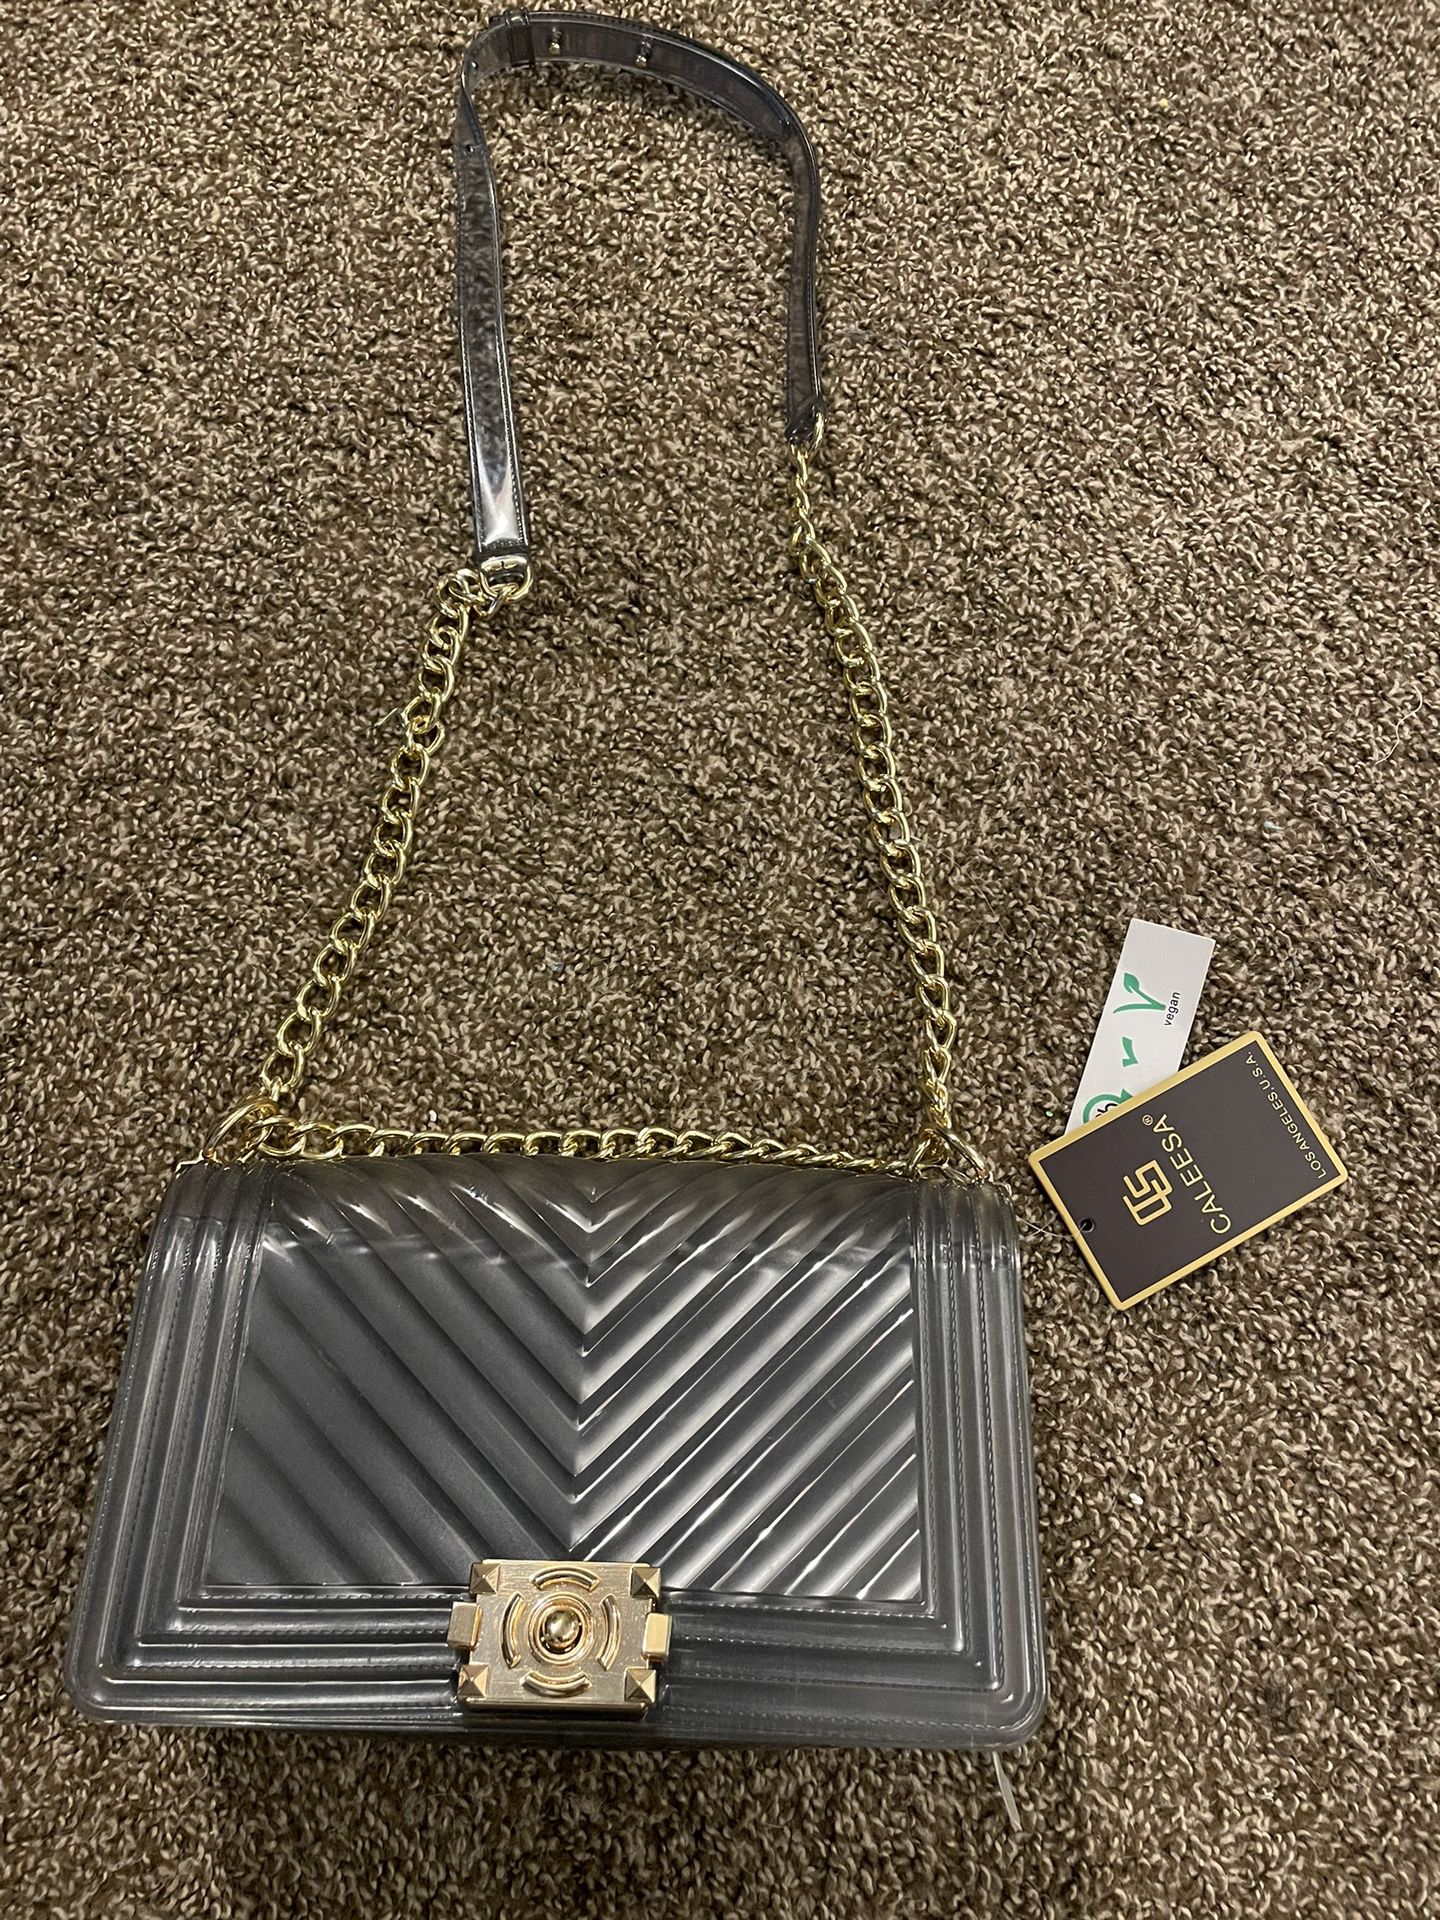 Caleesa Purse Brand new still with the tags on it